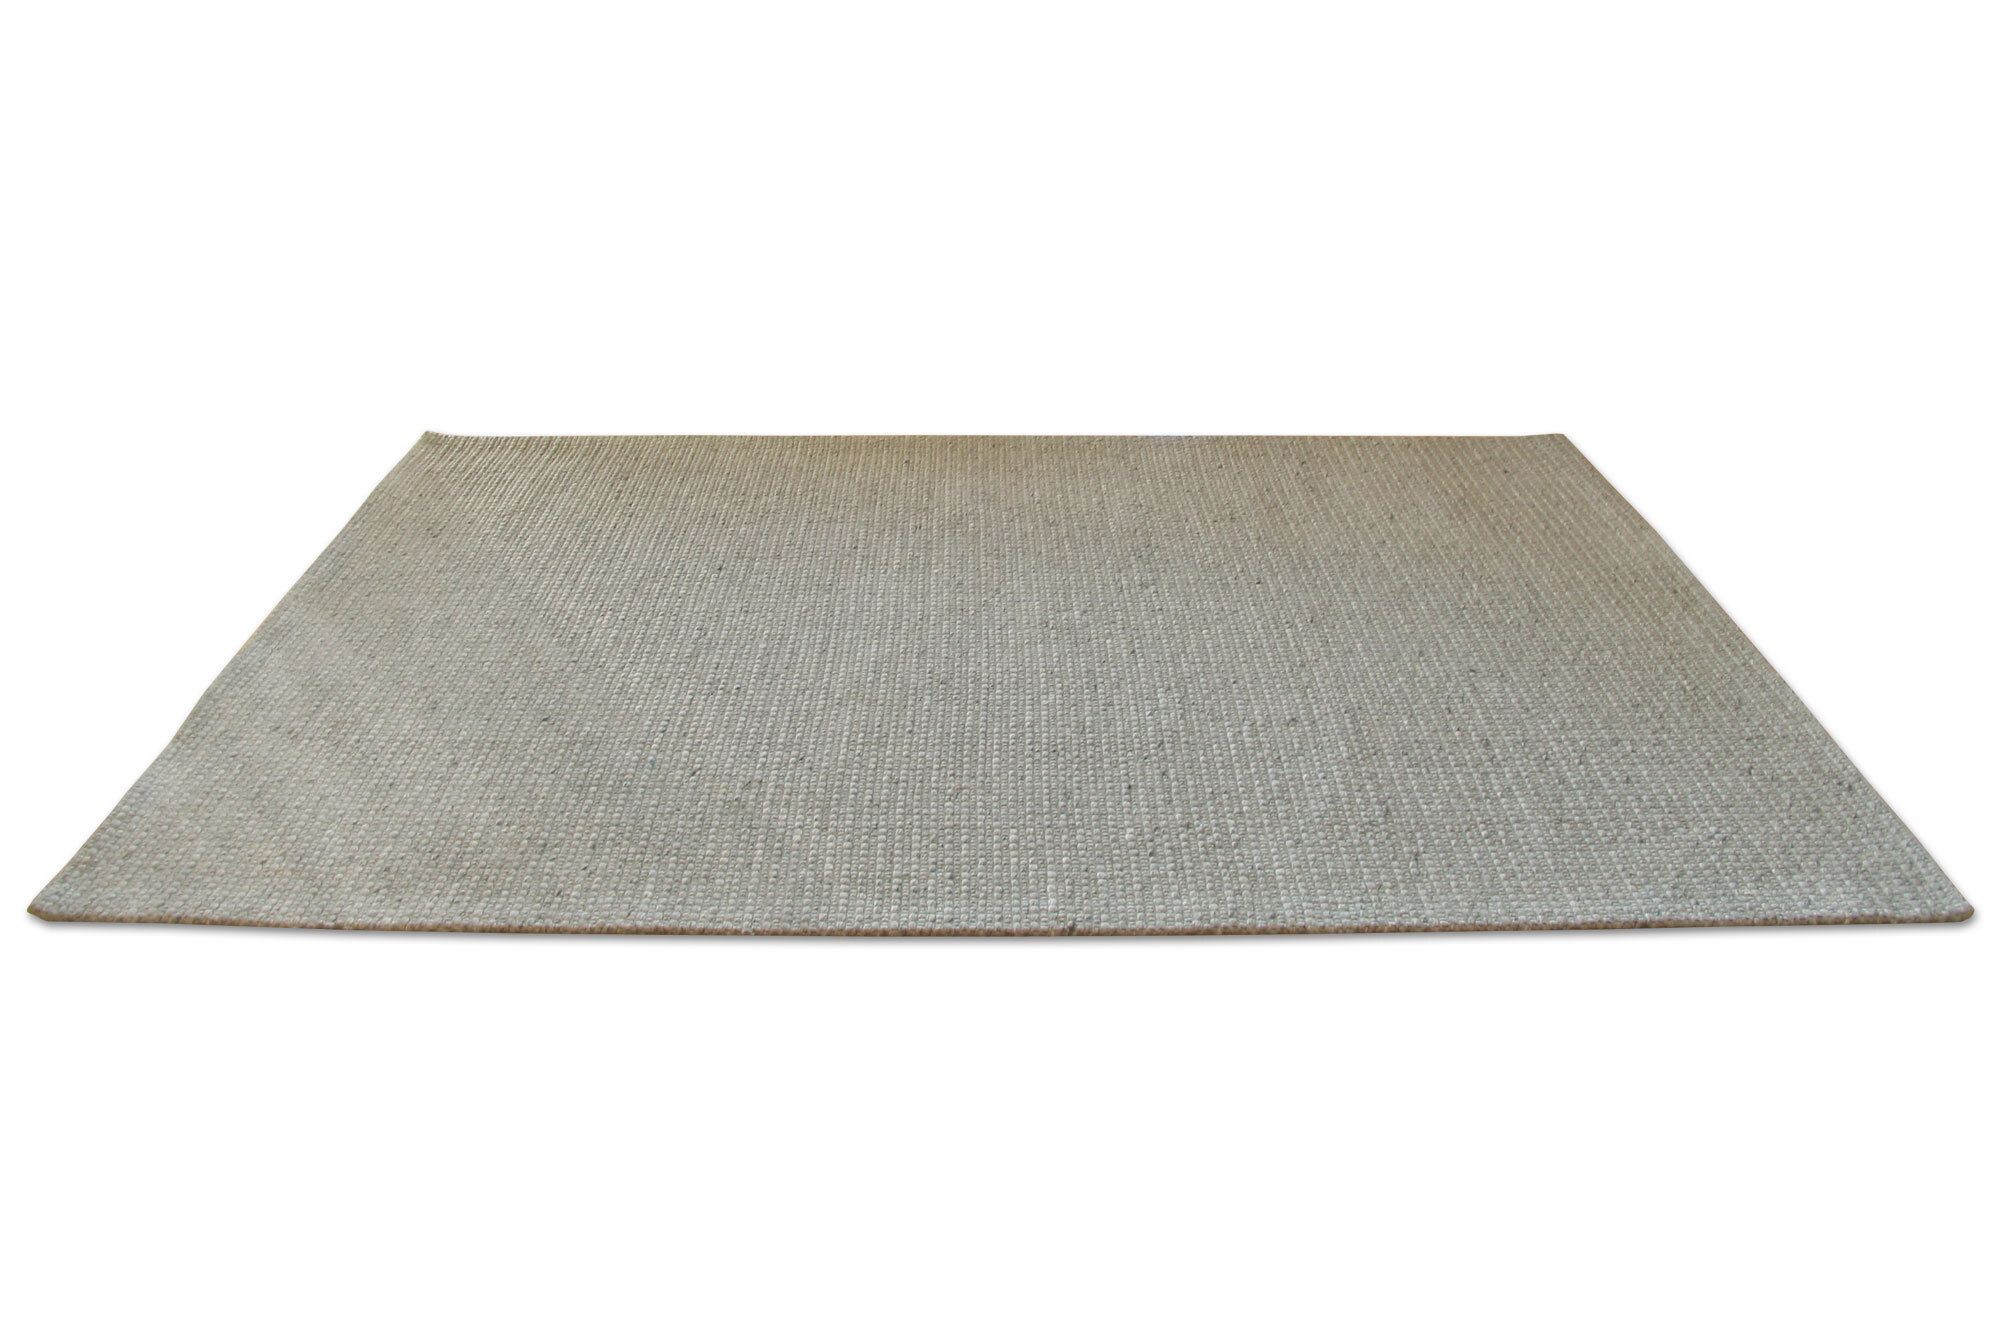 Tattersdale Wool Rug Collection